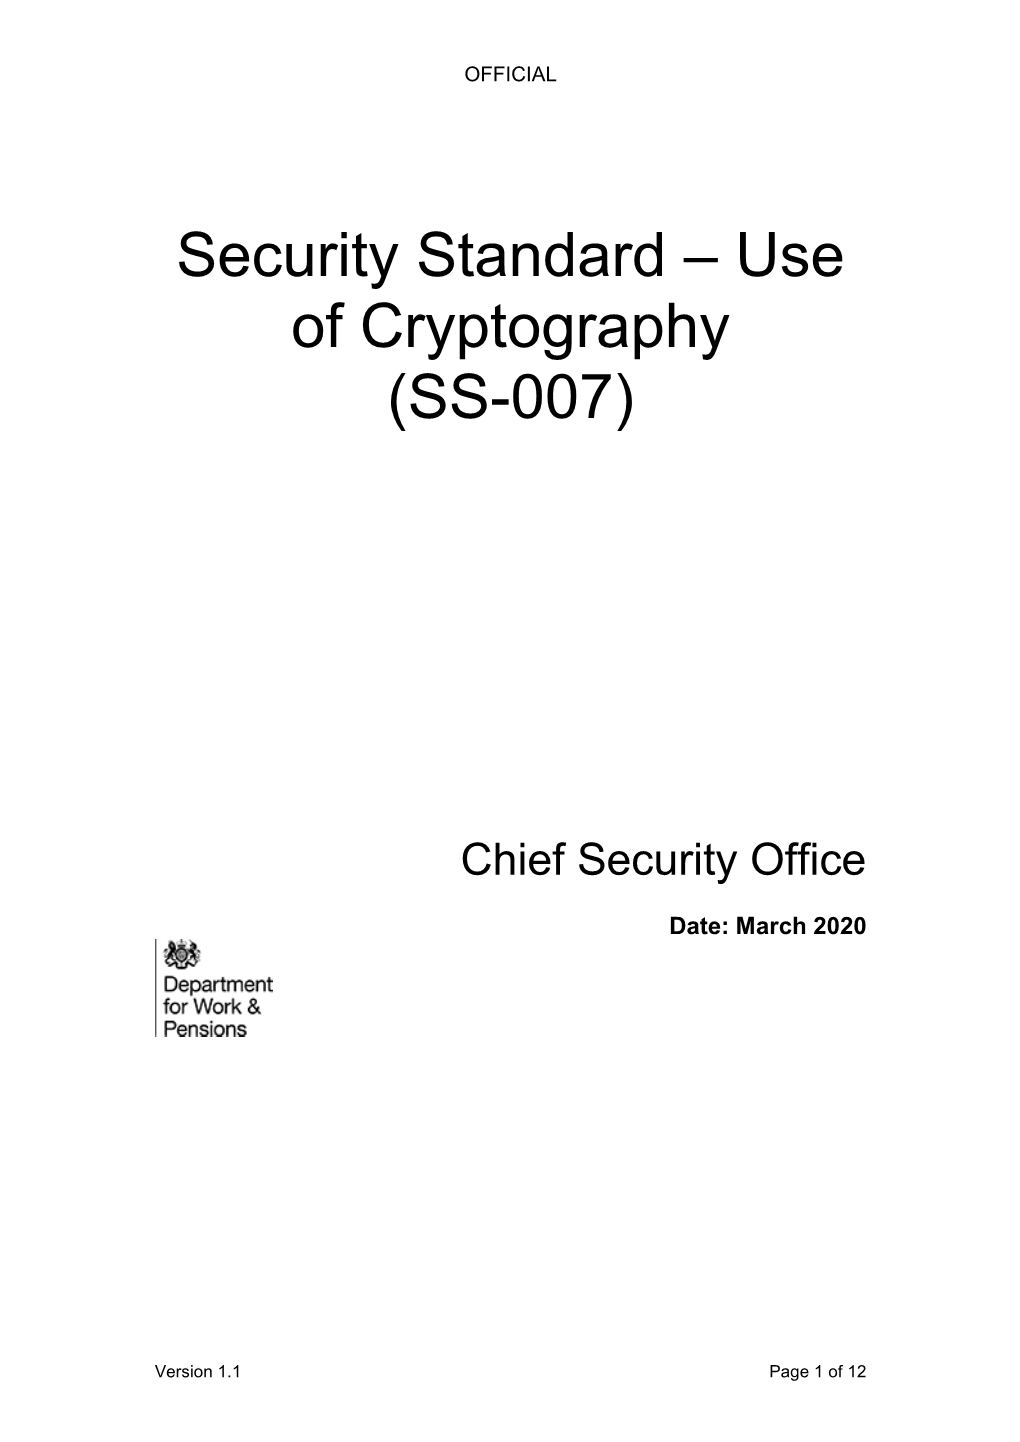 Security Standard SS-007: Use of Cryptography